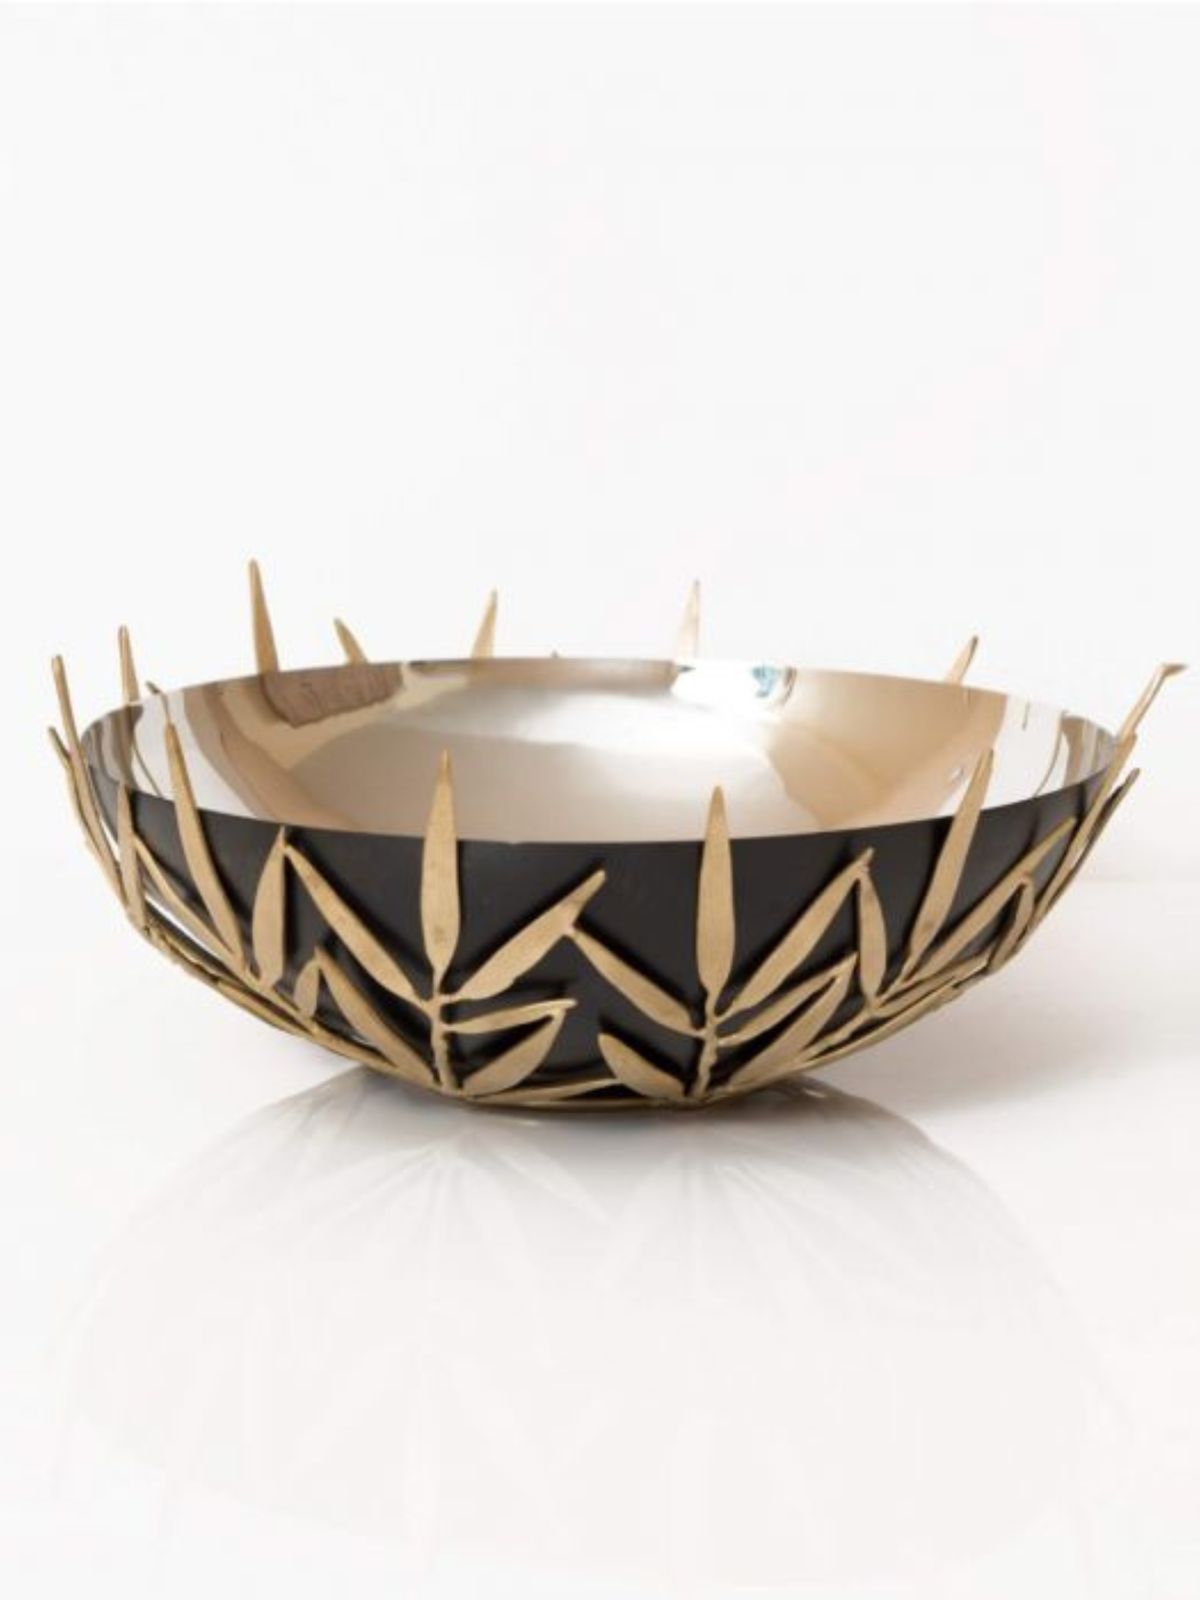 The beauty and elegance is inherent in this nature inspired bowl with black and gold leaves. The curving stems and vibrant leaves are elegant and deeply alluring.